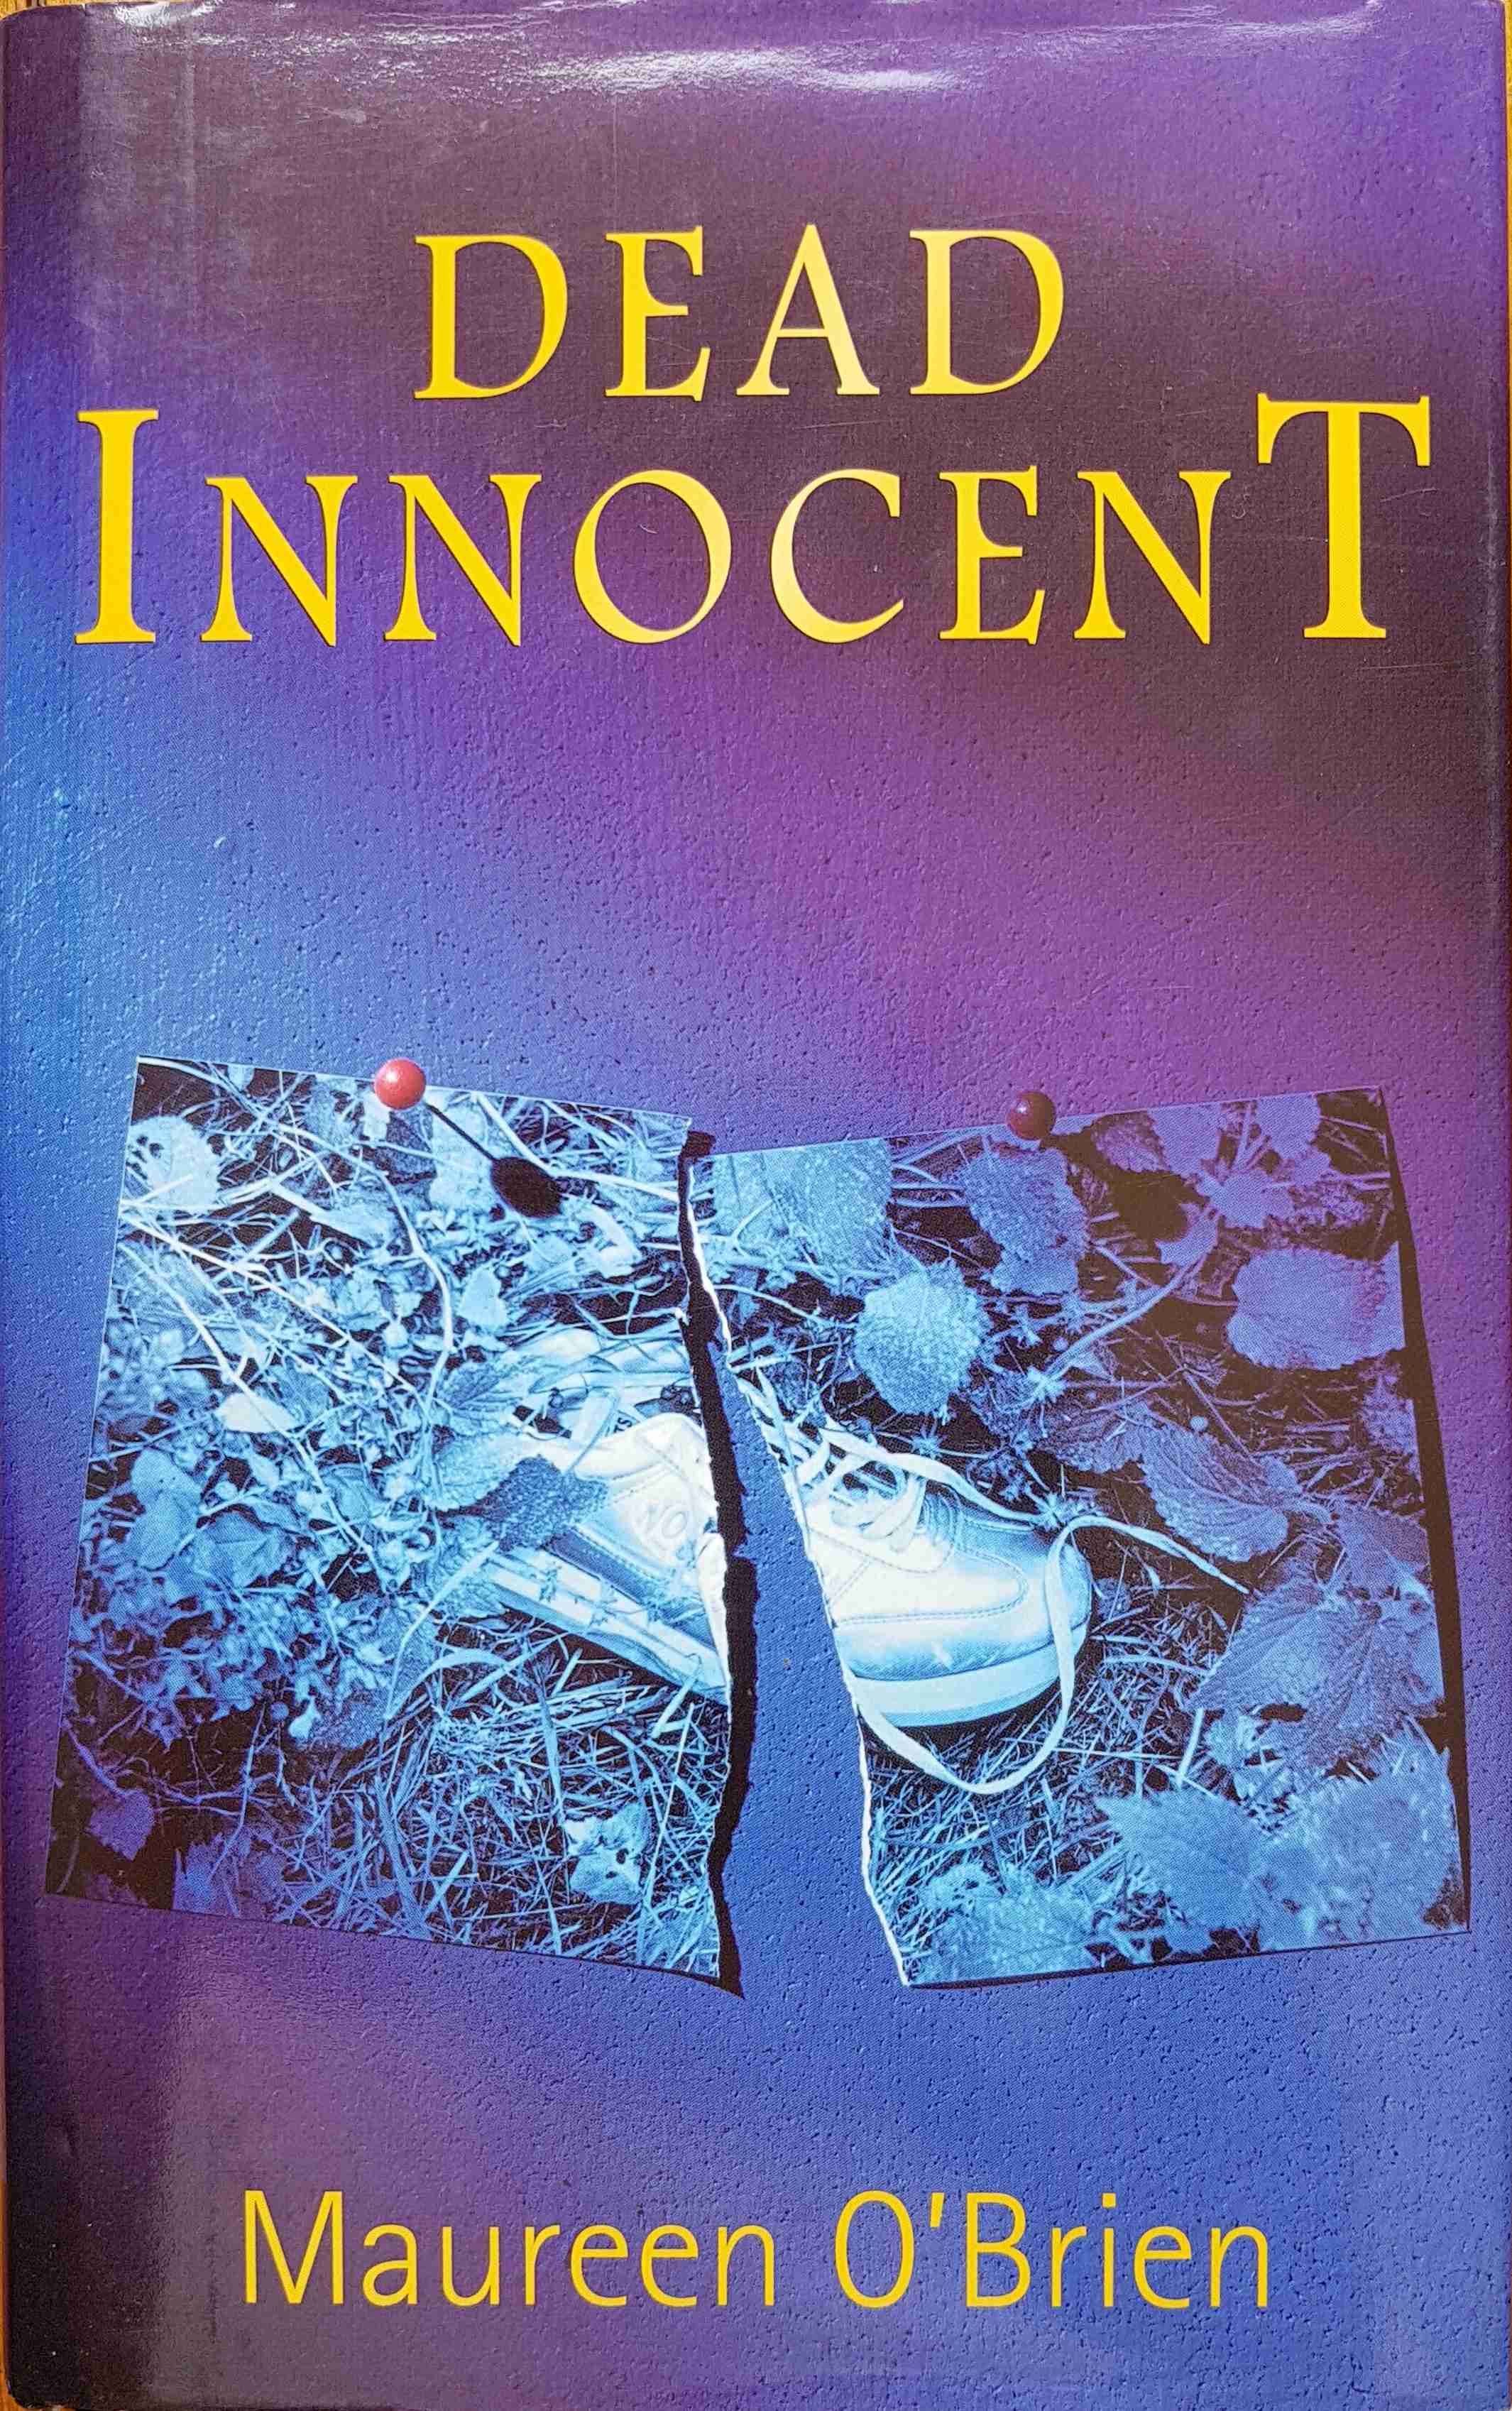 Picture of Dead innocent by artist Maureen O'Brien 